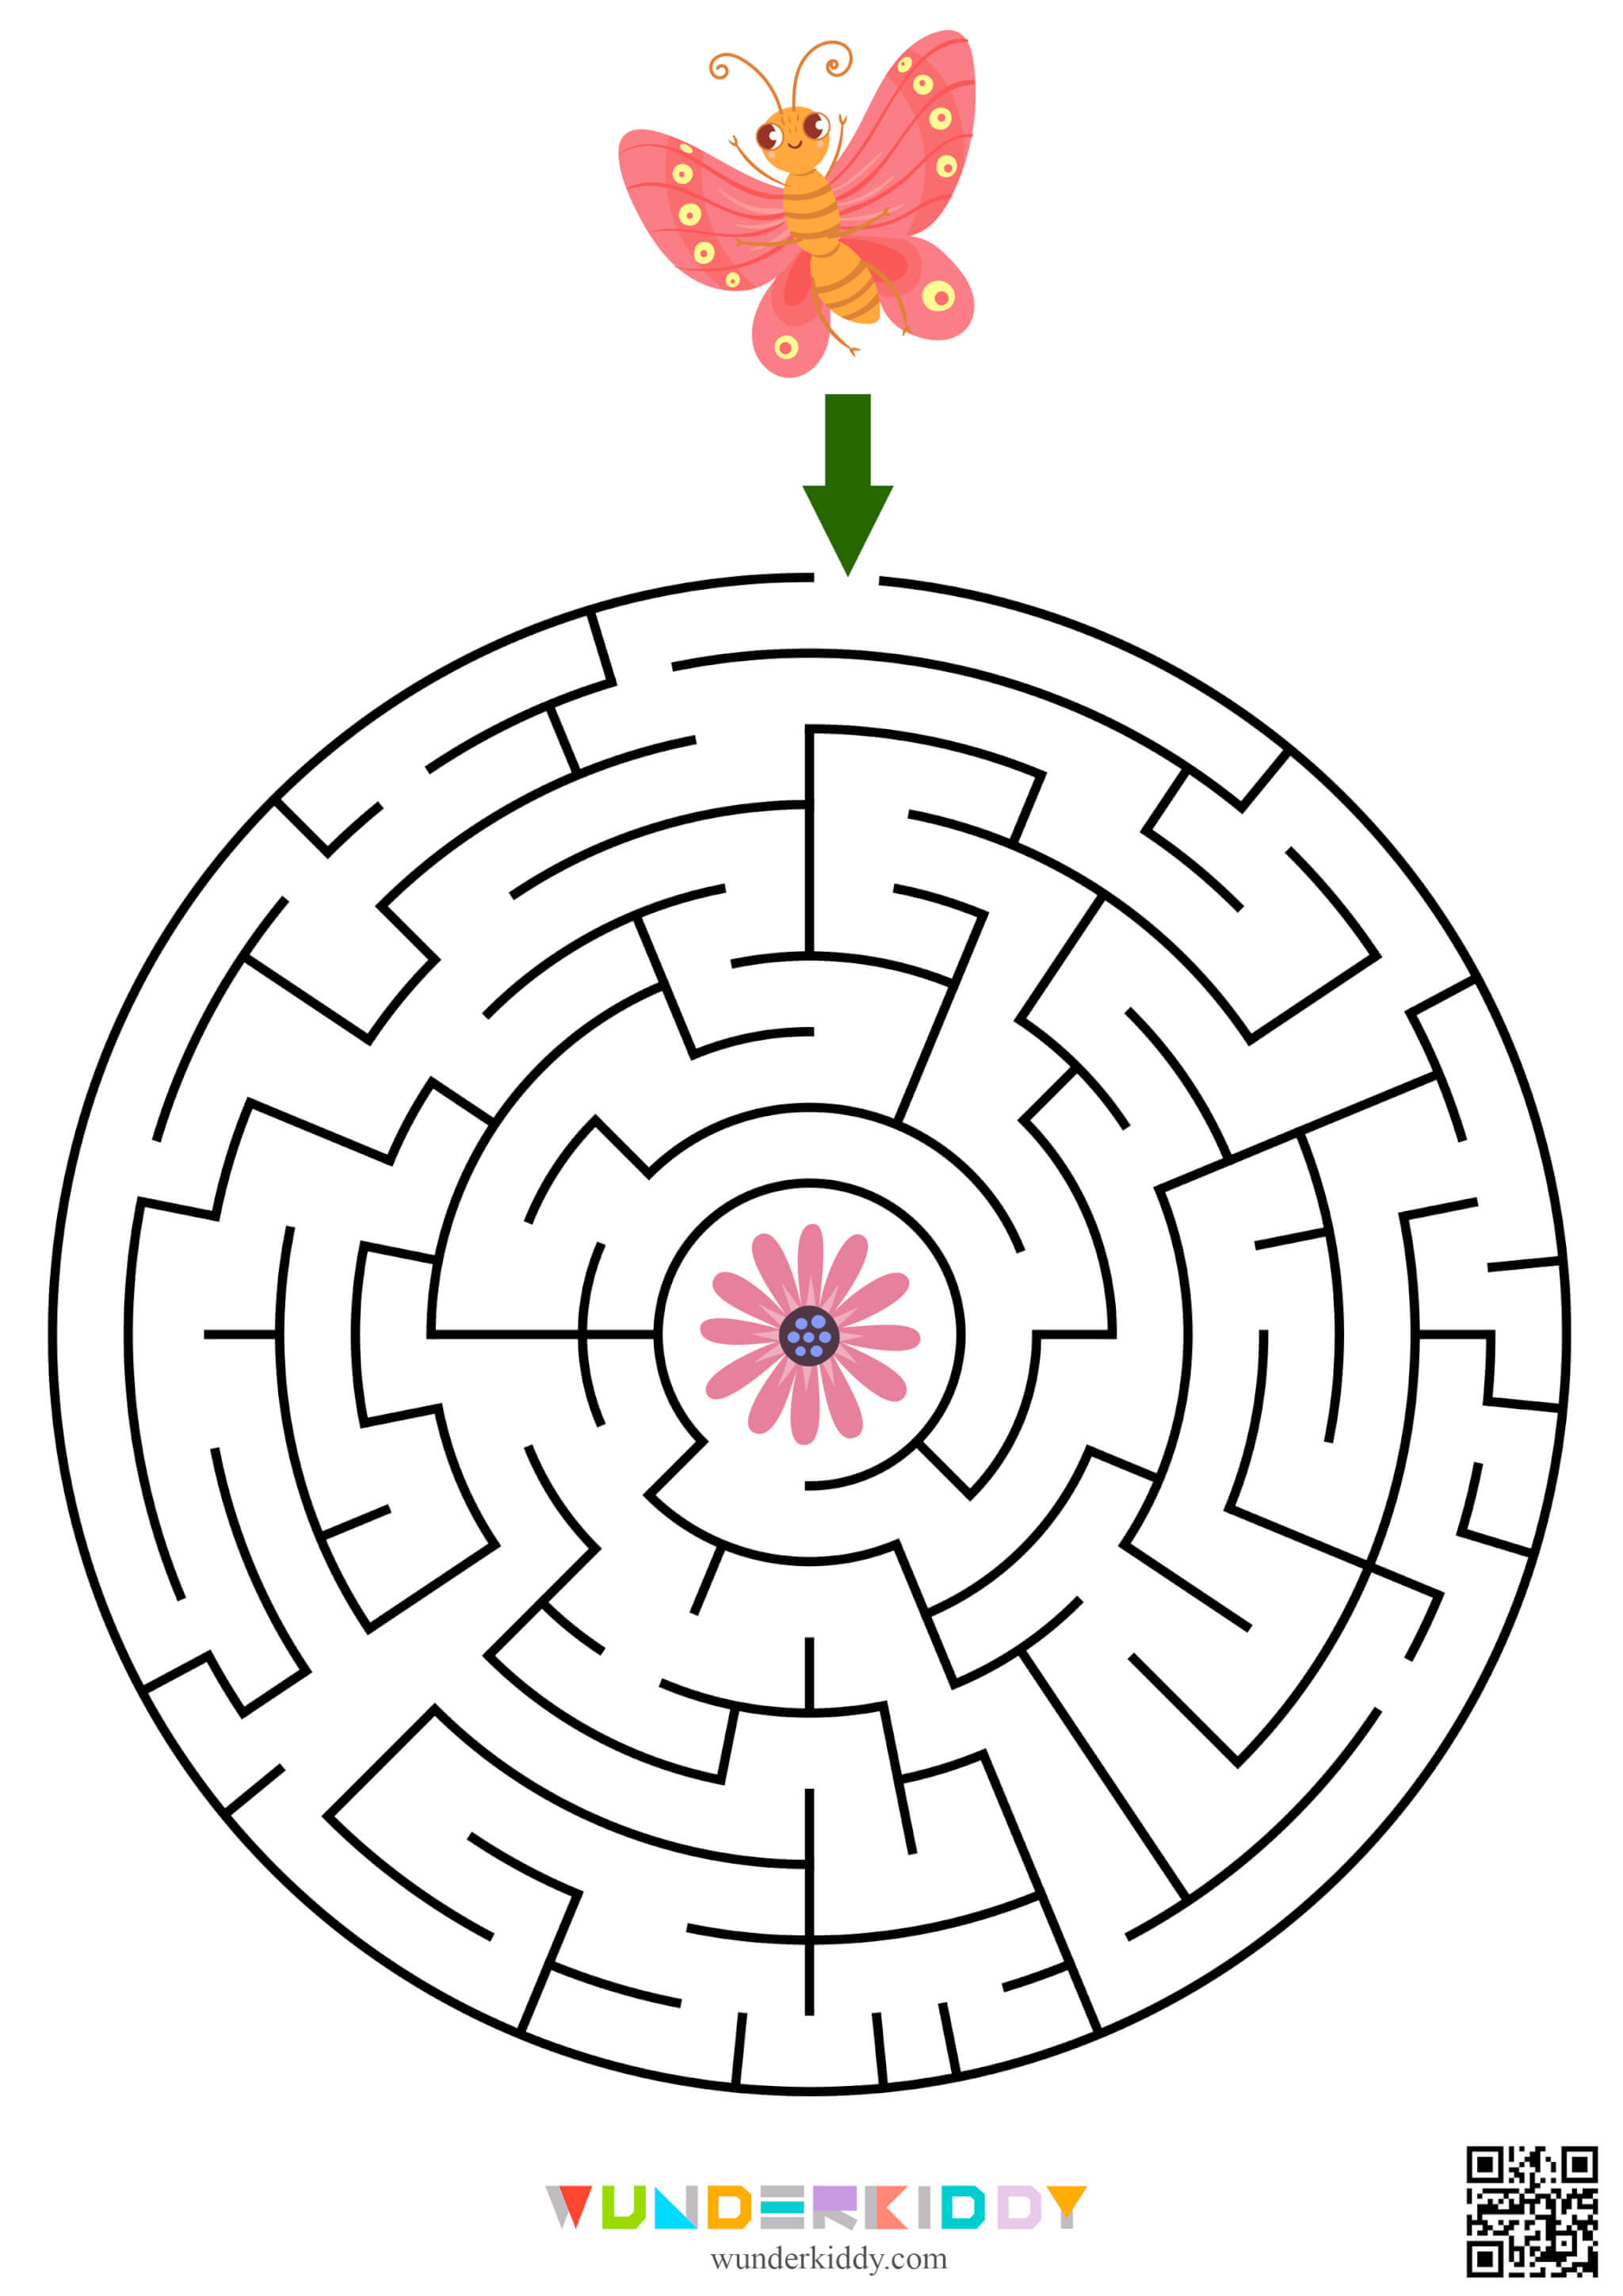 Printable Maze for Kids Help to Find the Way - Image 5